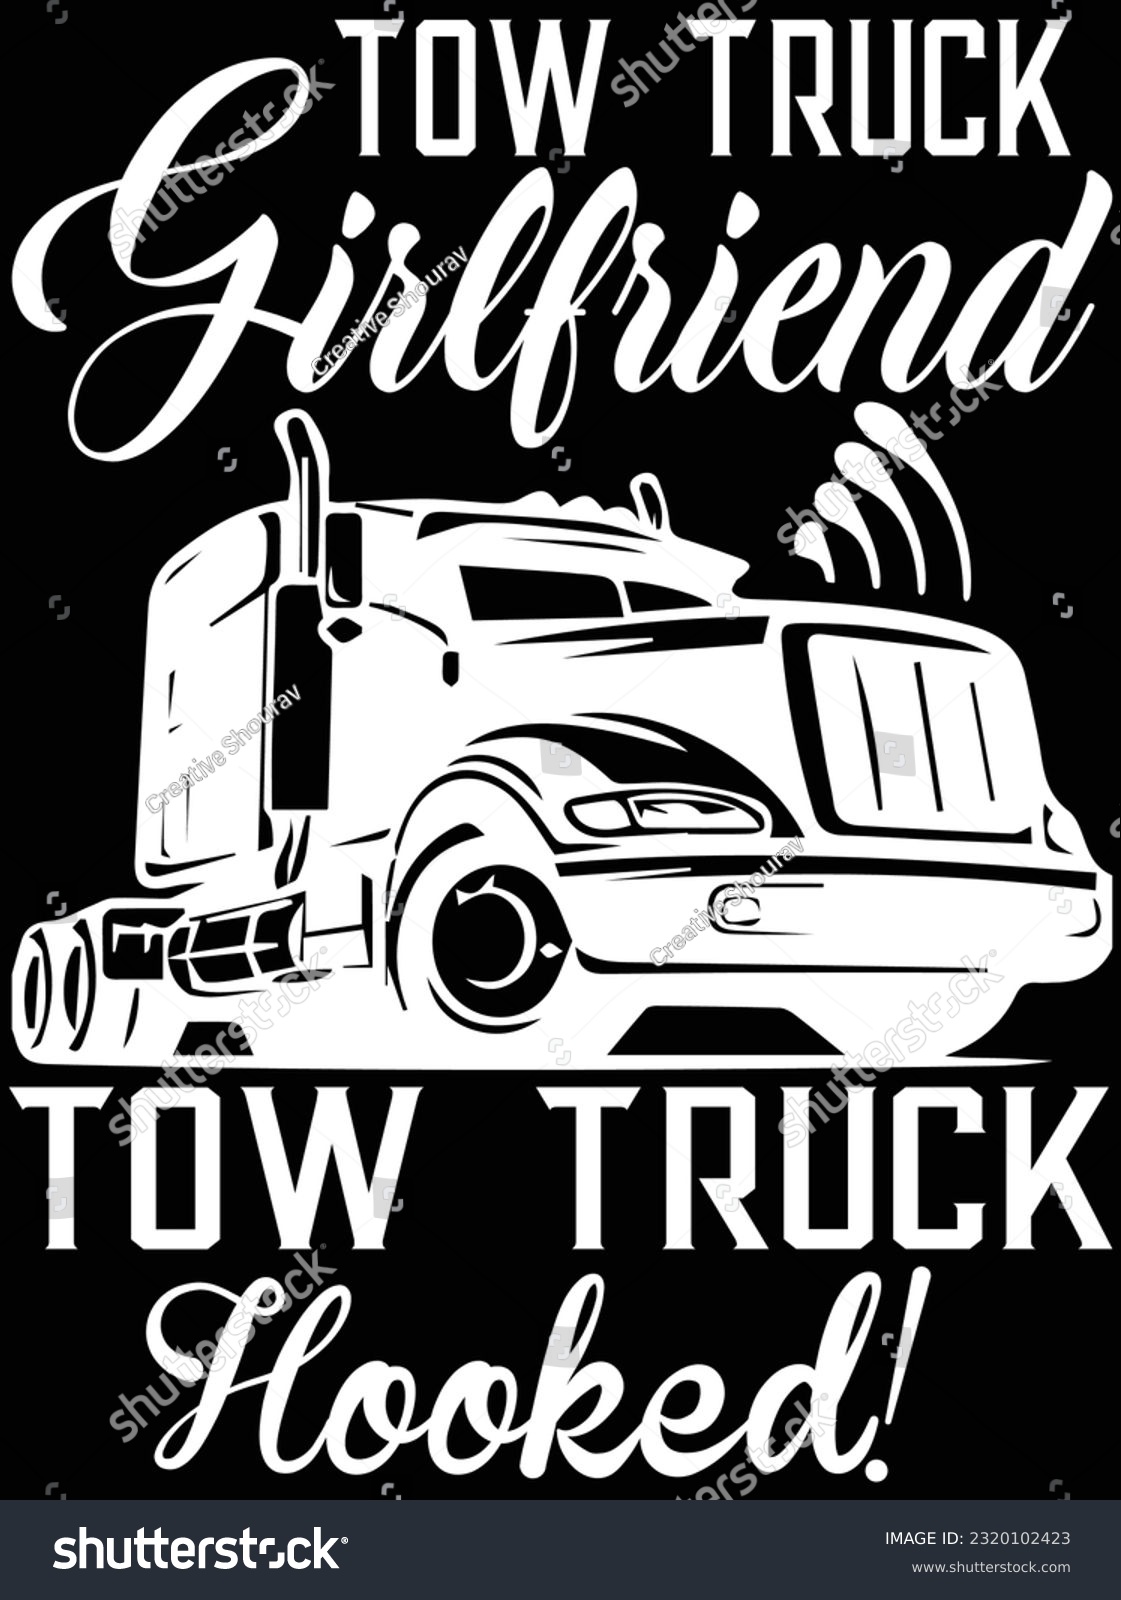 SVG of Tow truck girlfriend tow truck hooked vector art design, eps file. design file for t-shirt. SVG, EPS cuttable design file svg